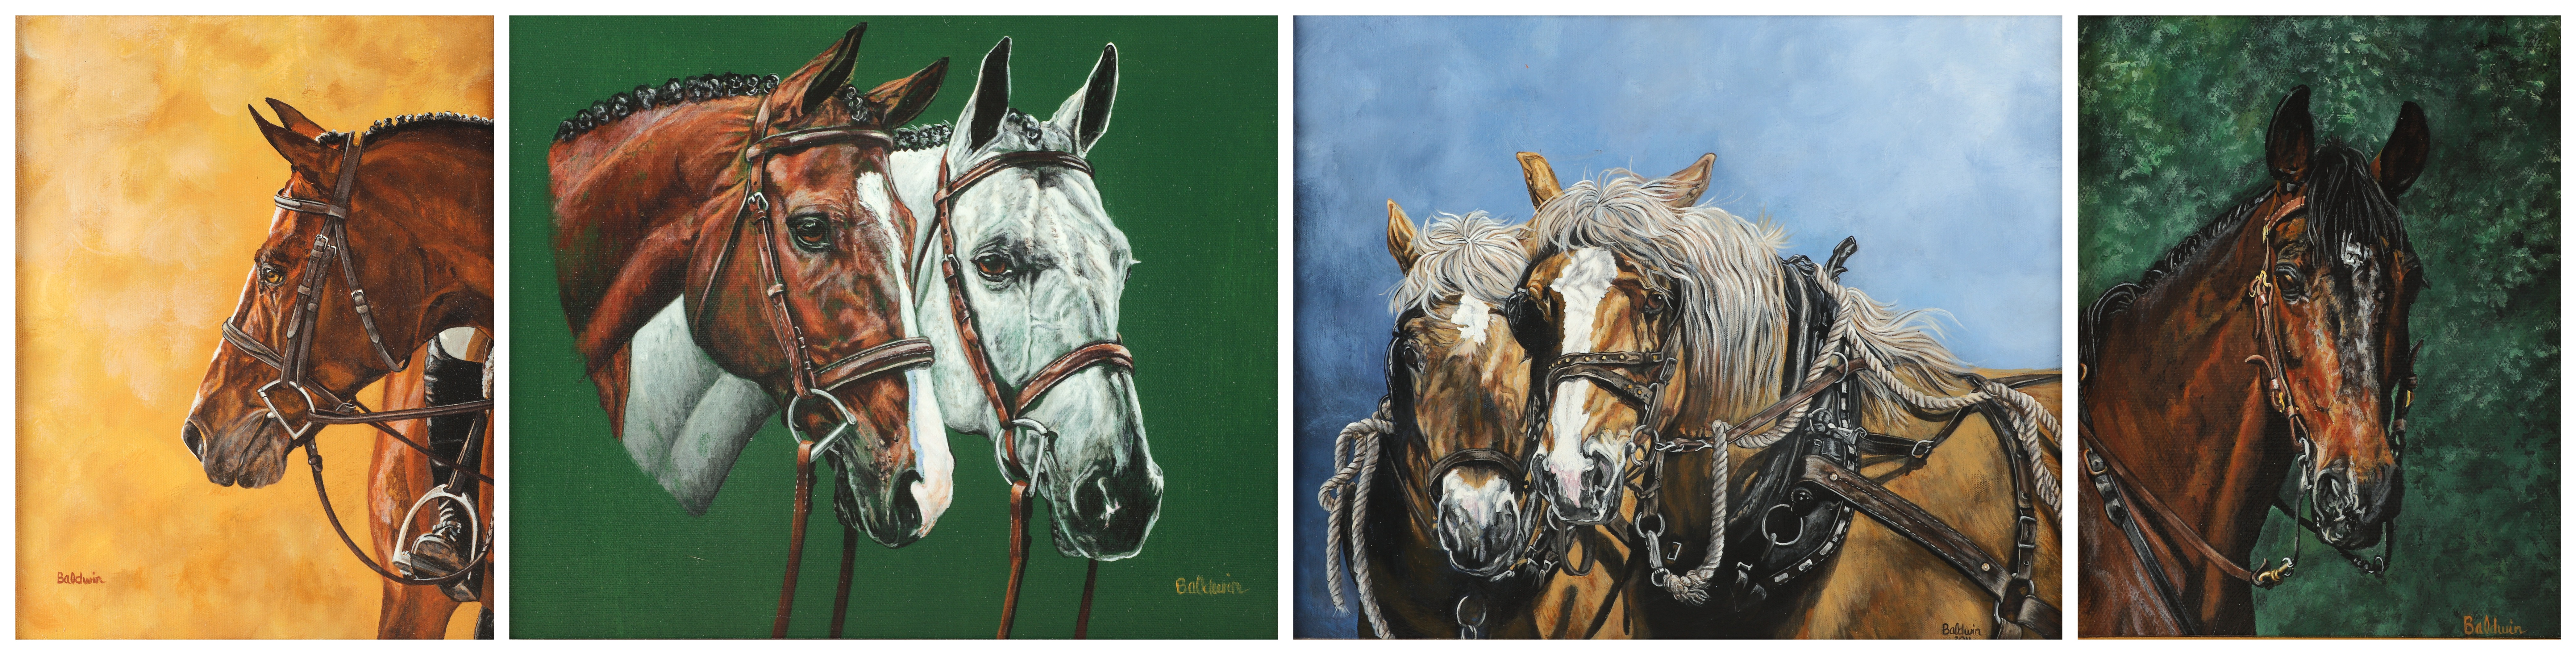  4 Equestrian paintings and prints  3b3b0a